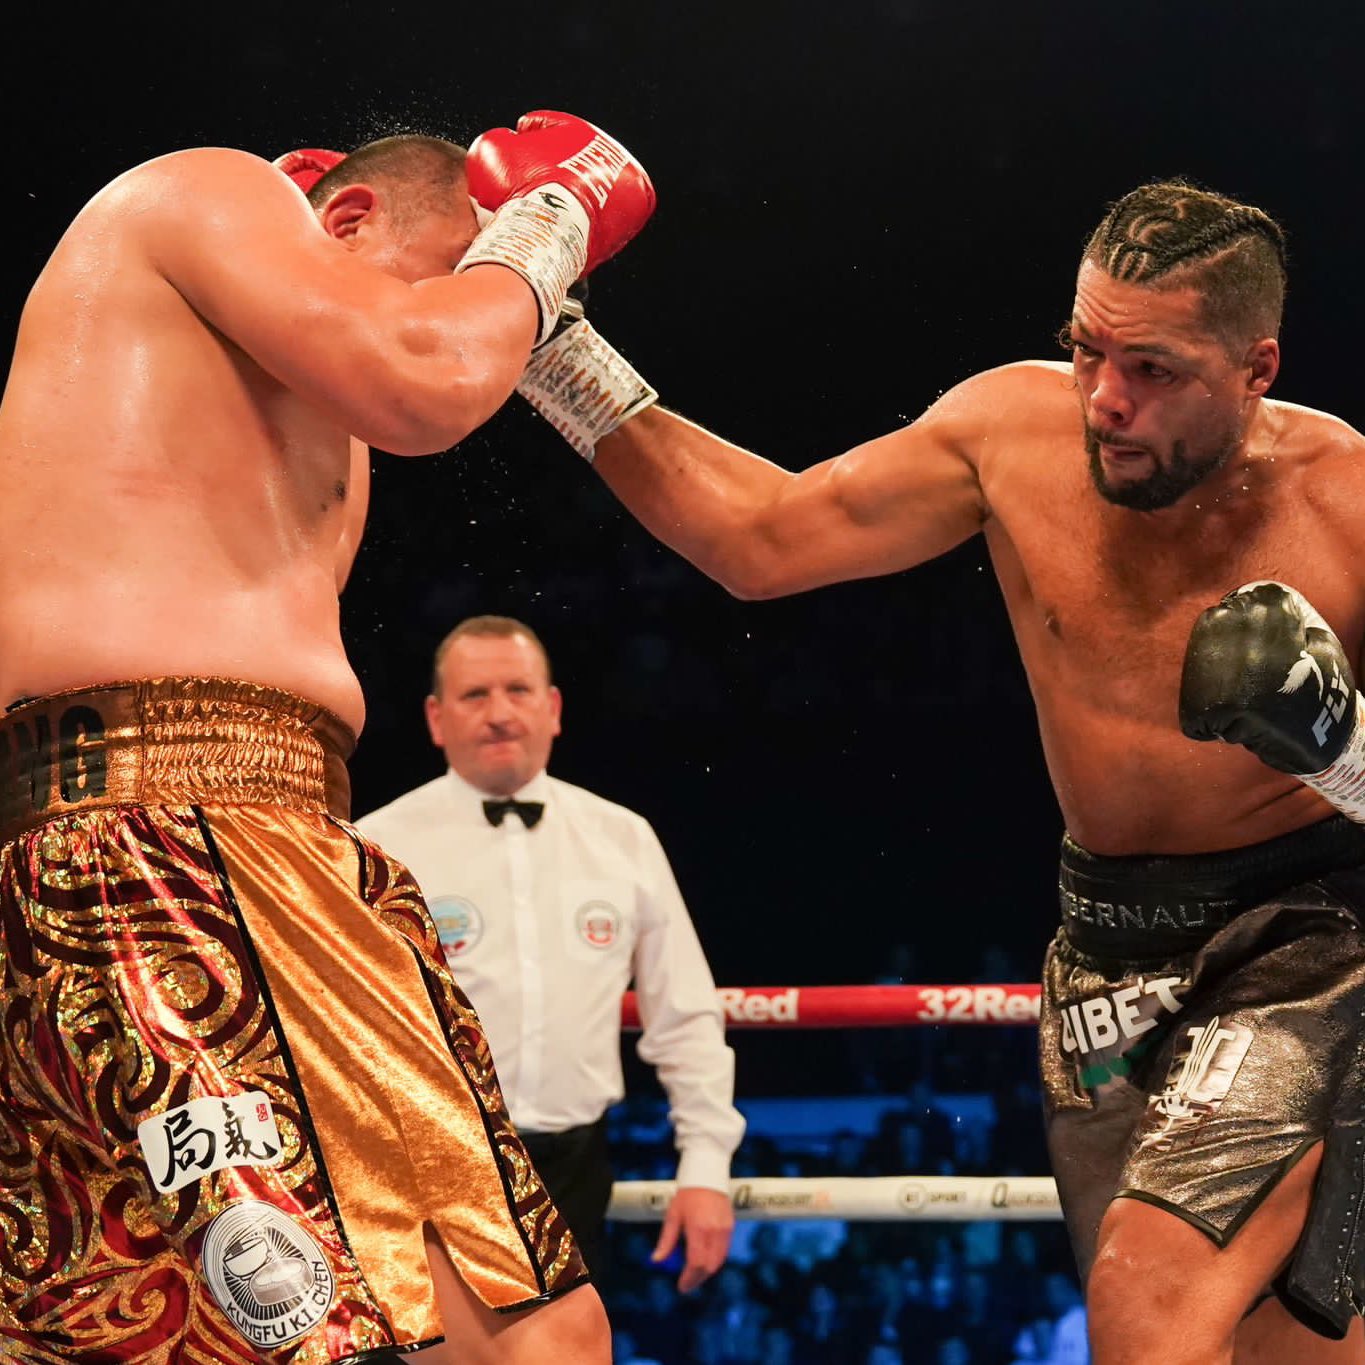 Joe Joyce: 'I'm coming to take back what's mine' ahead of Zhang rematch encounter